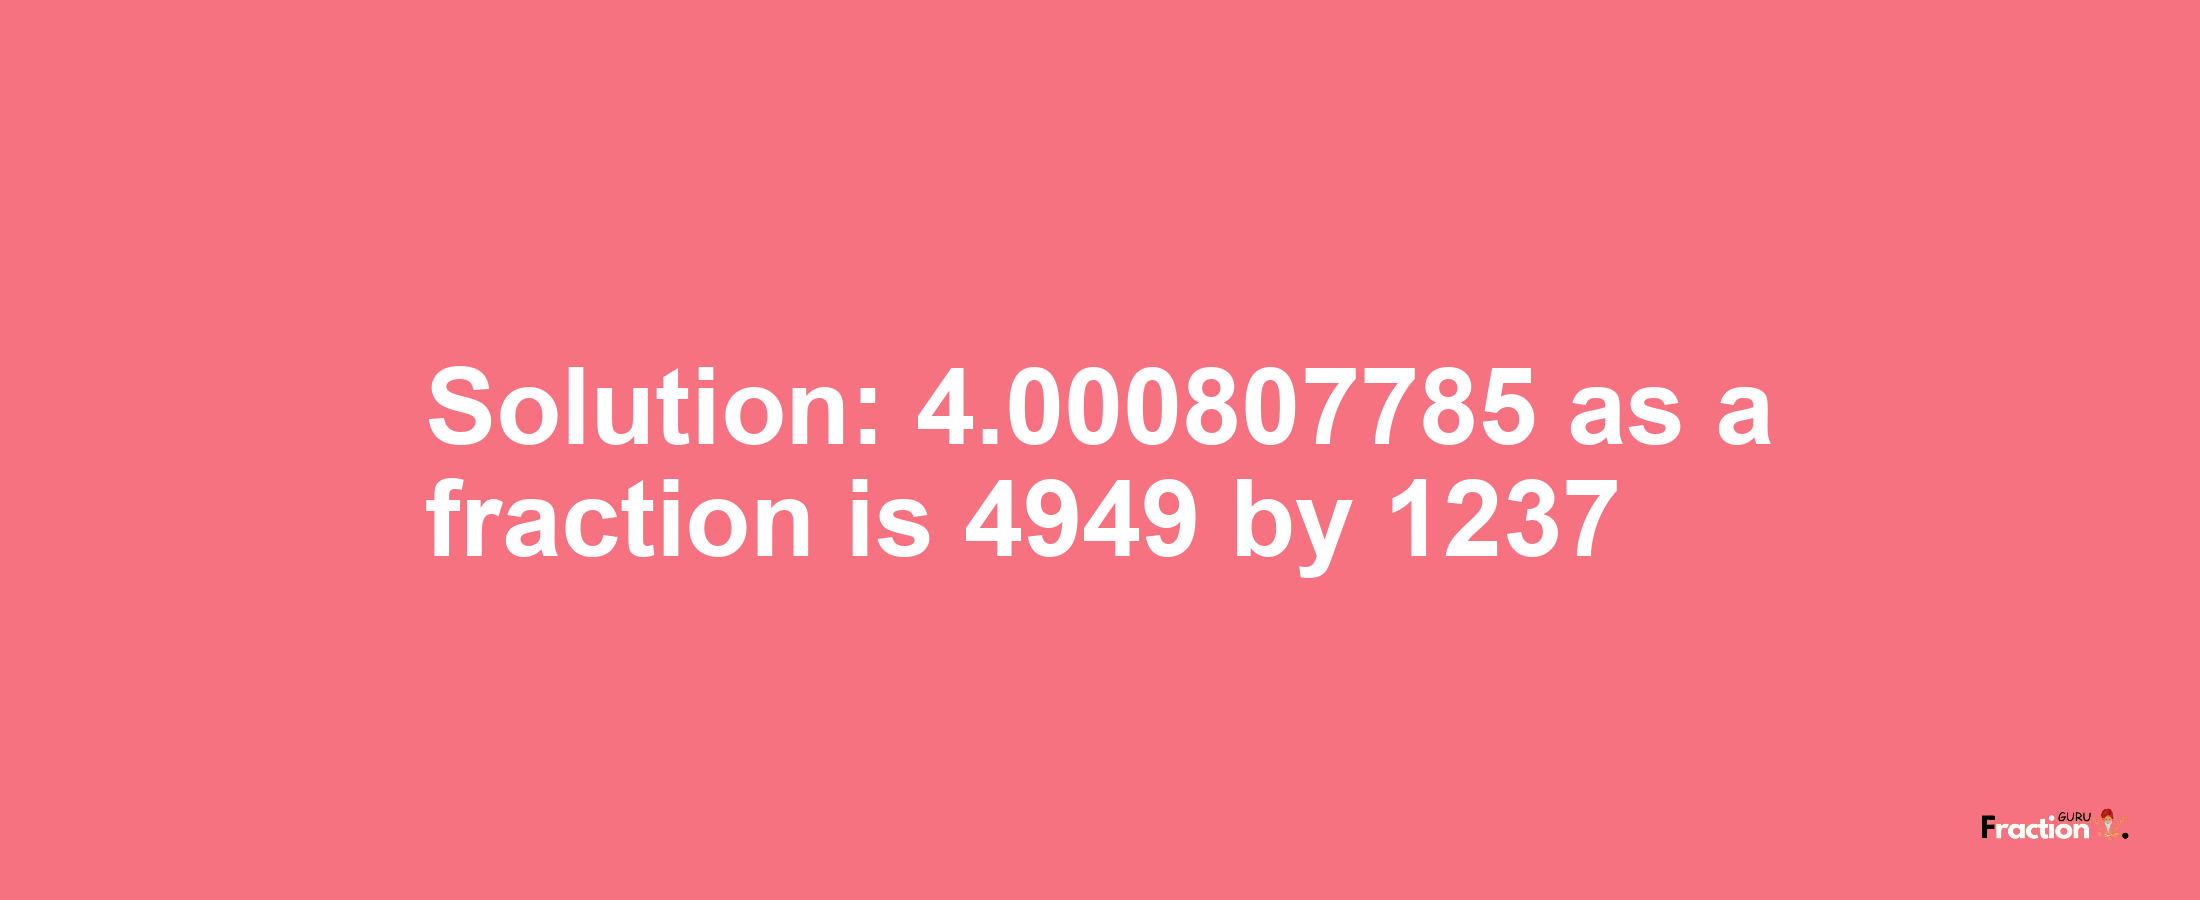 Solution:4.000807785 as a fraction is 4949/1237